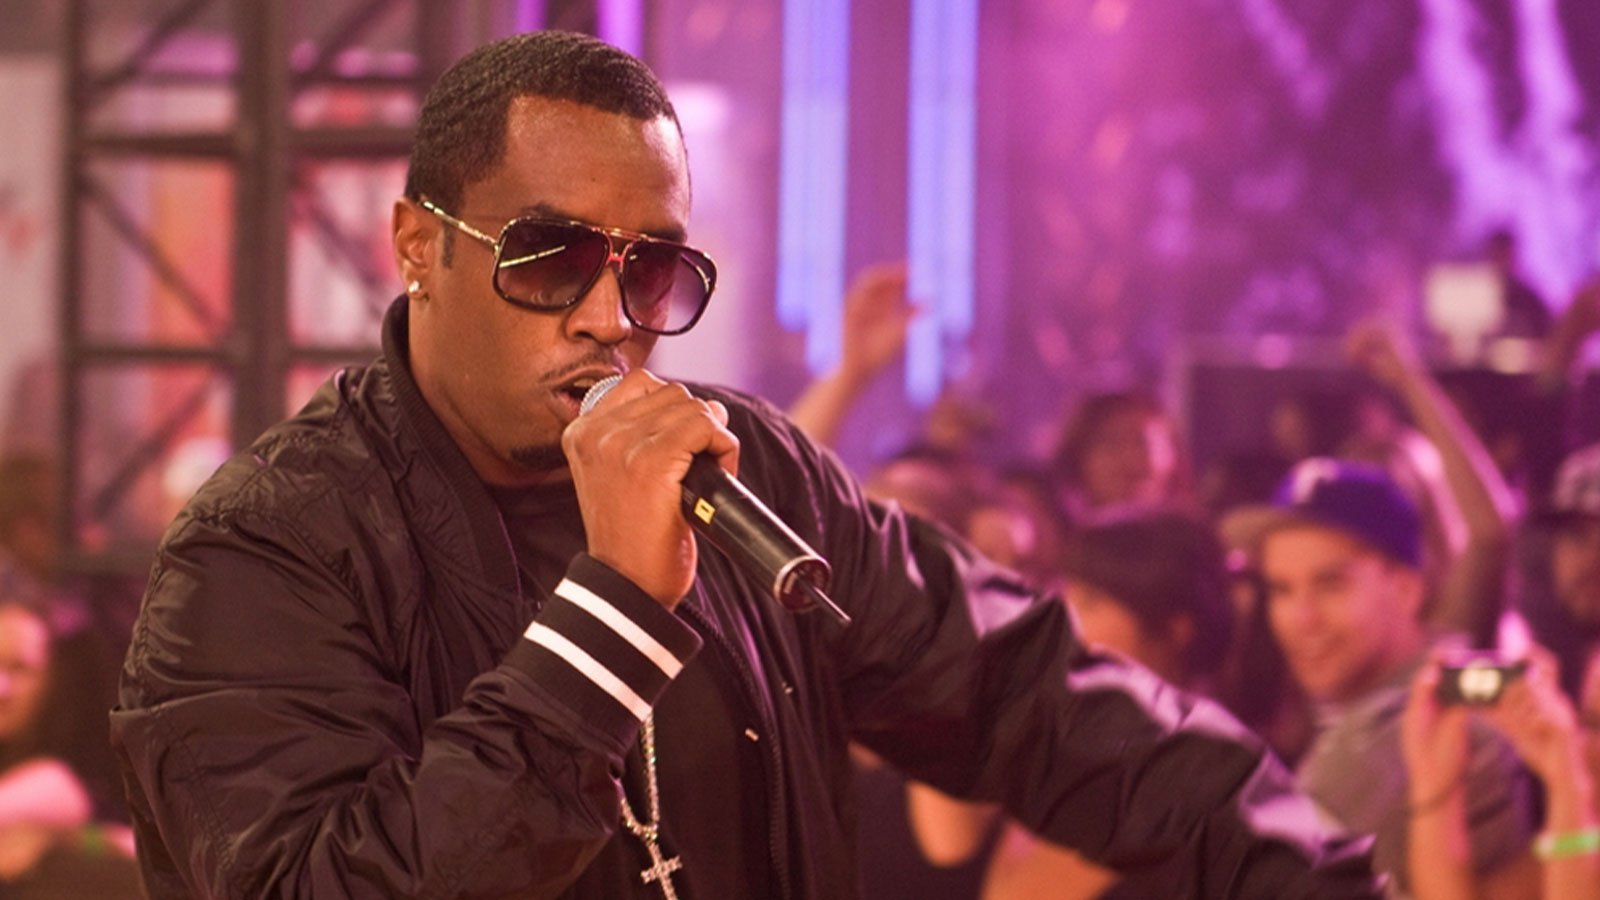 From raids to revelations: The dark turn in Sean ‘Diddy’ Combs’ saga